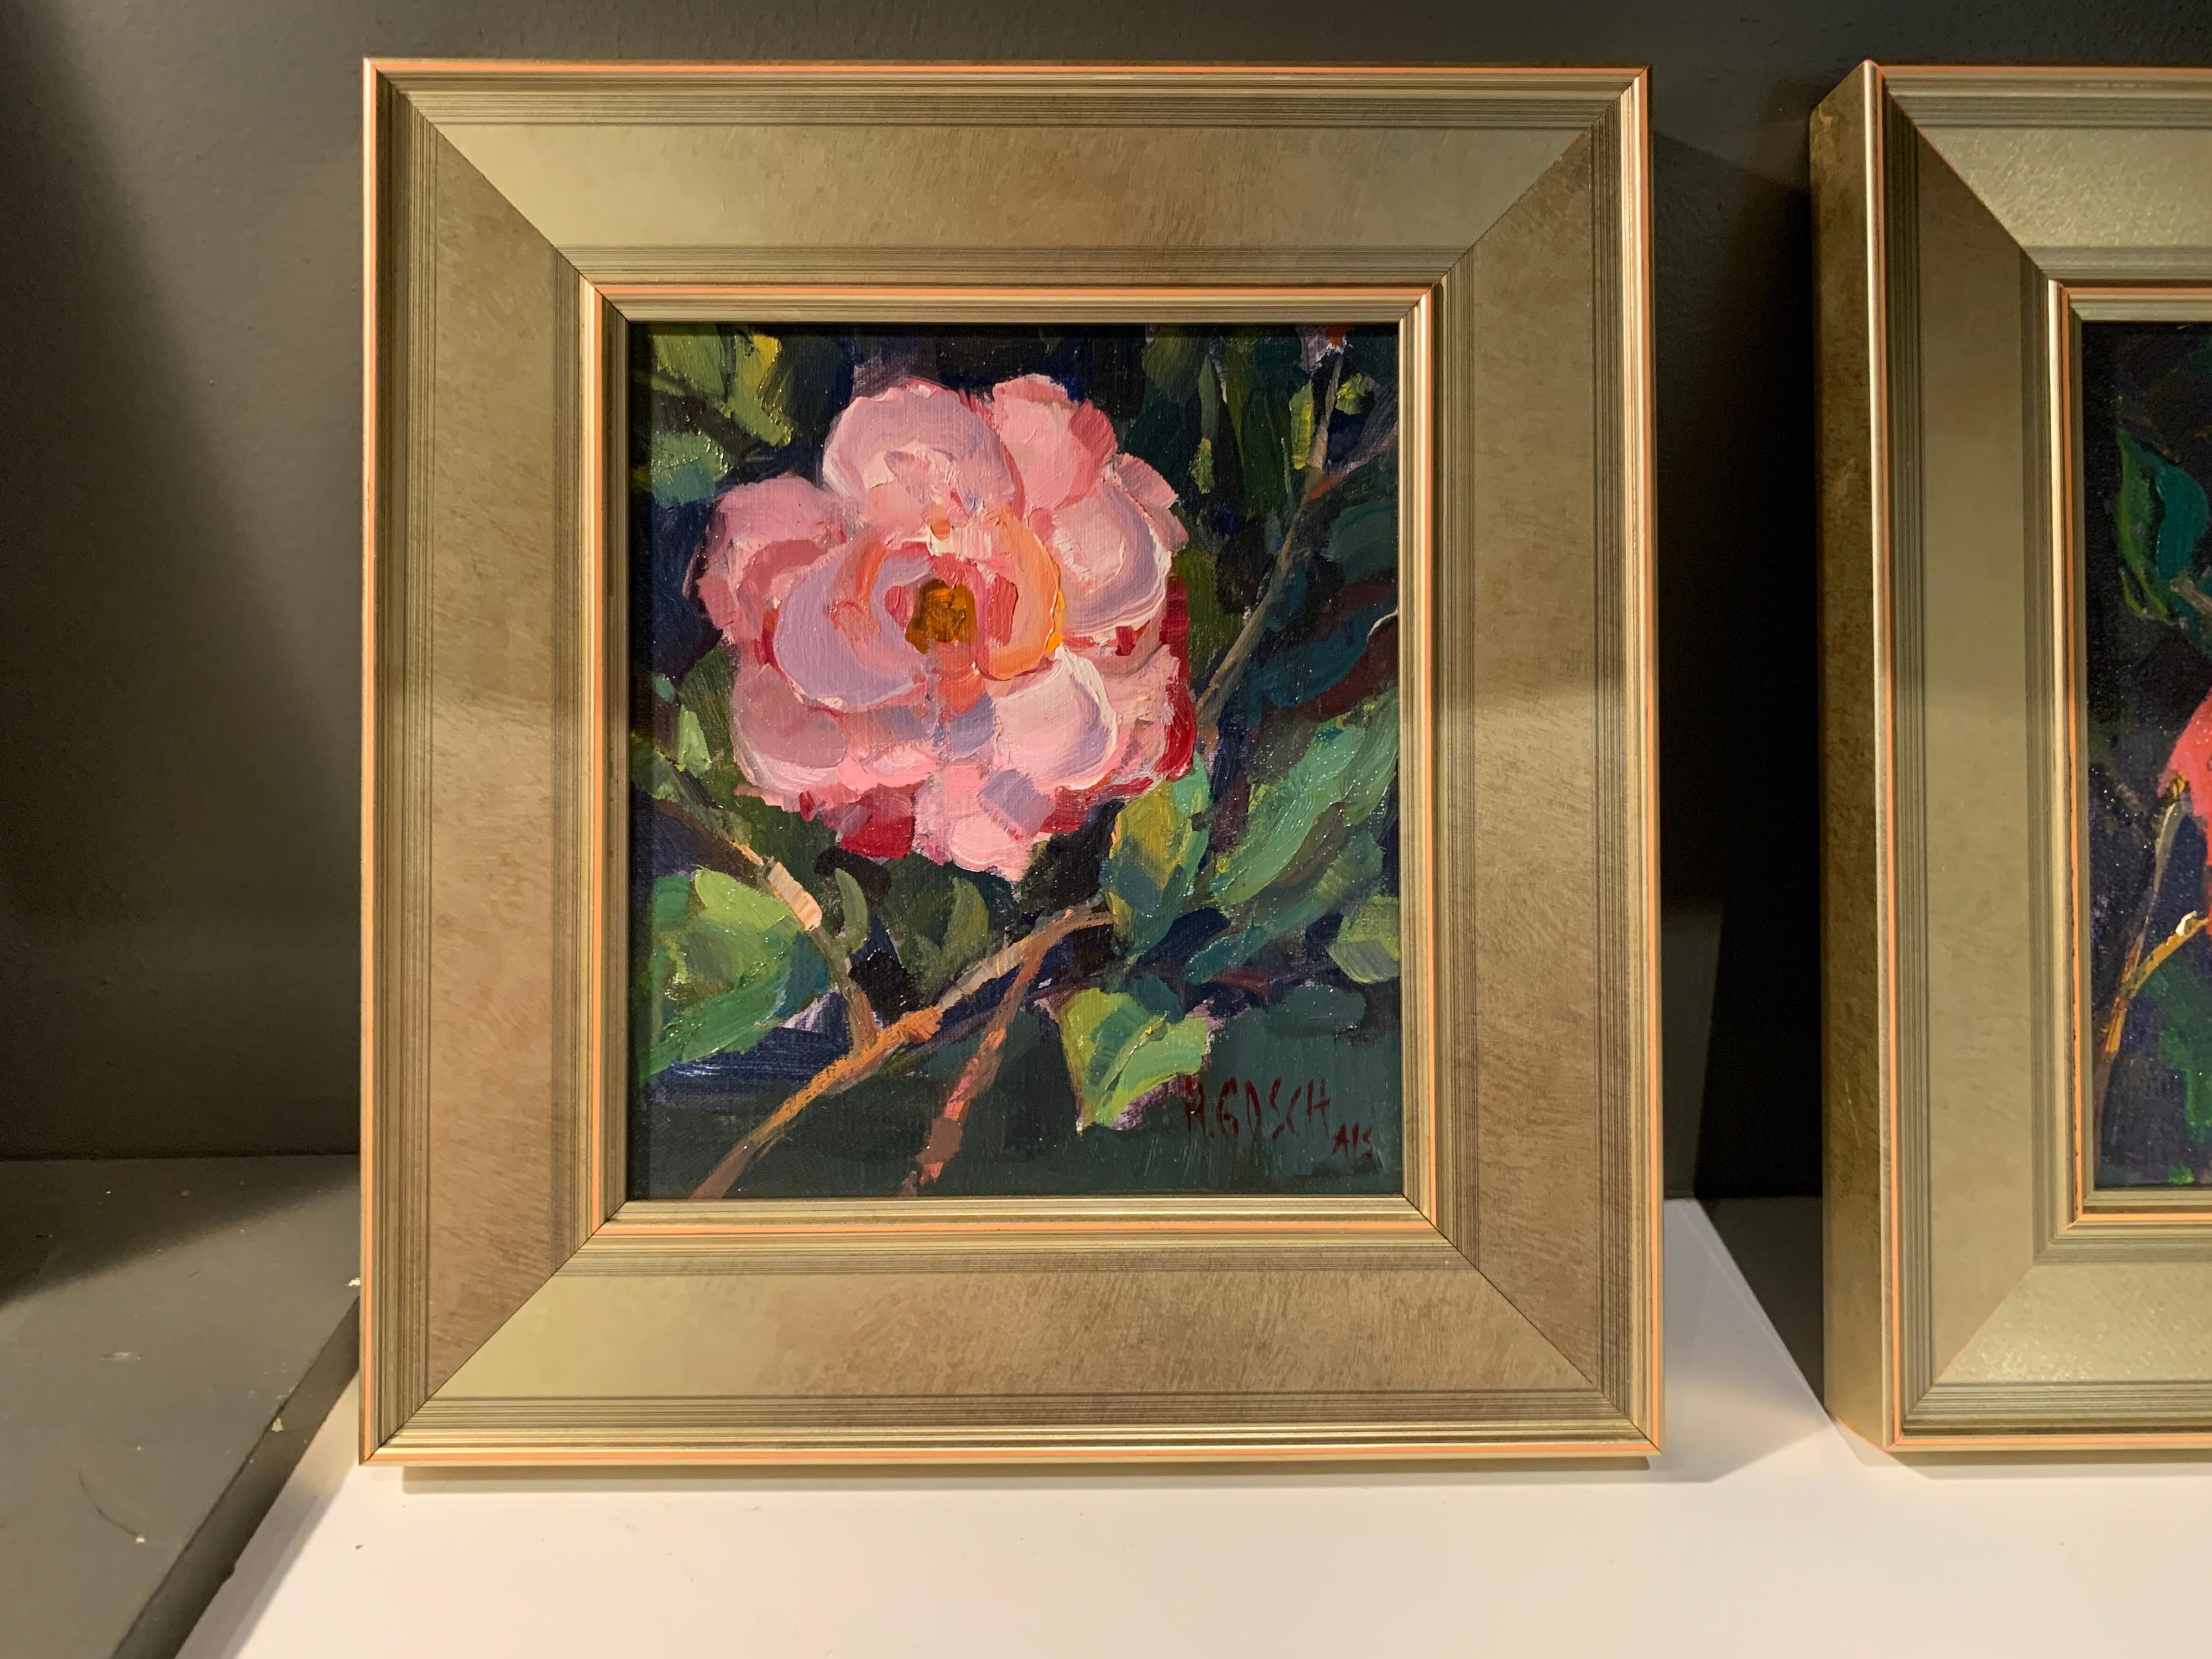 'Southern Serenade' is a small framed Impressionist oil on board still-life painting created by American artist Millie Gosch in 2020. Featuring a palette made of pink, green and blue tones among others, this still-life painting depicts a bouquet of